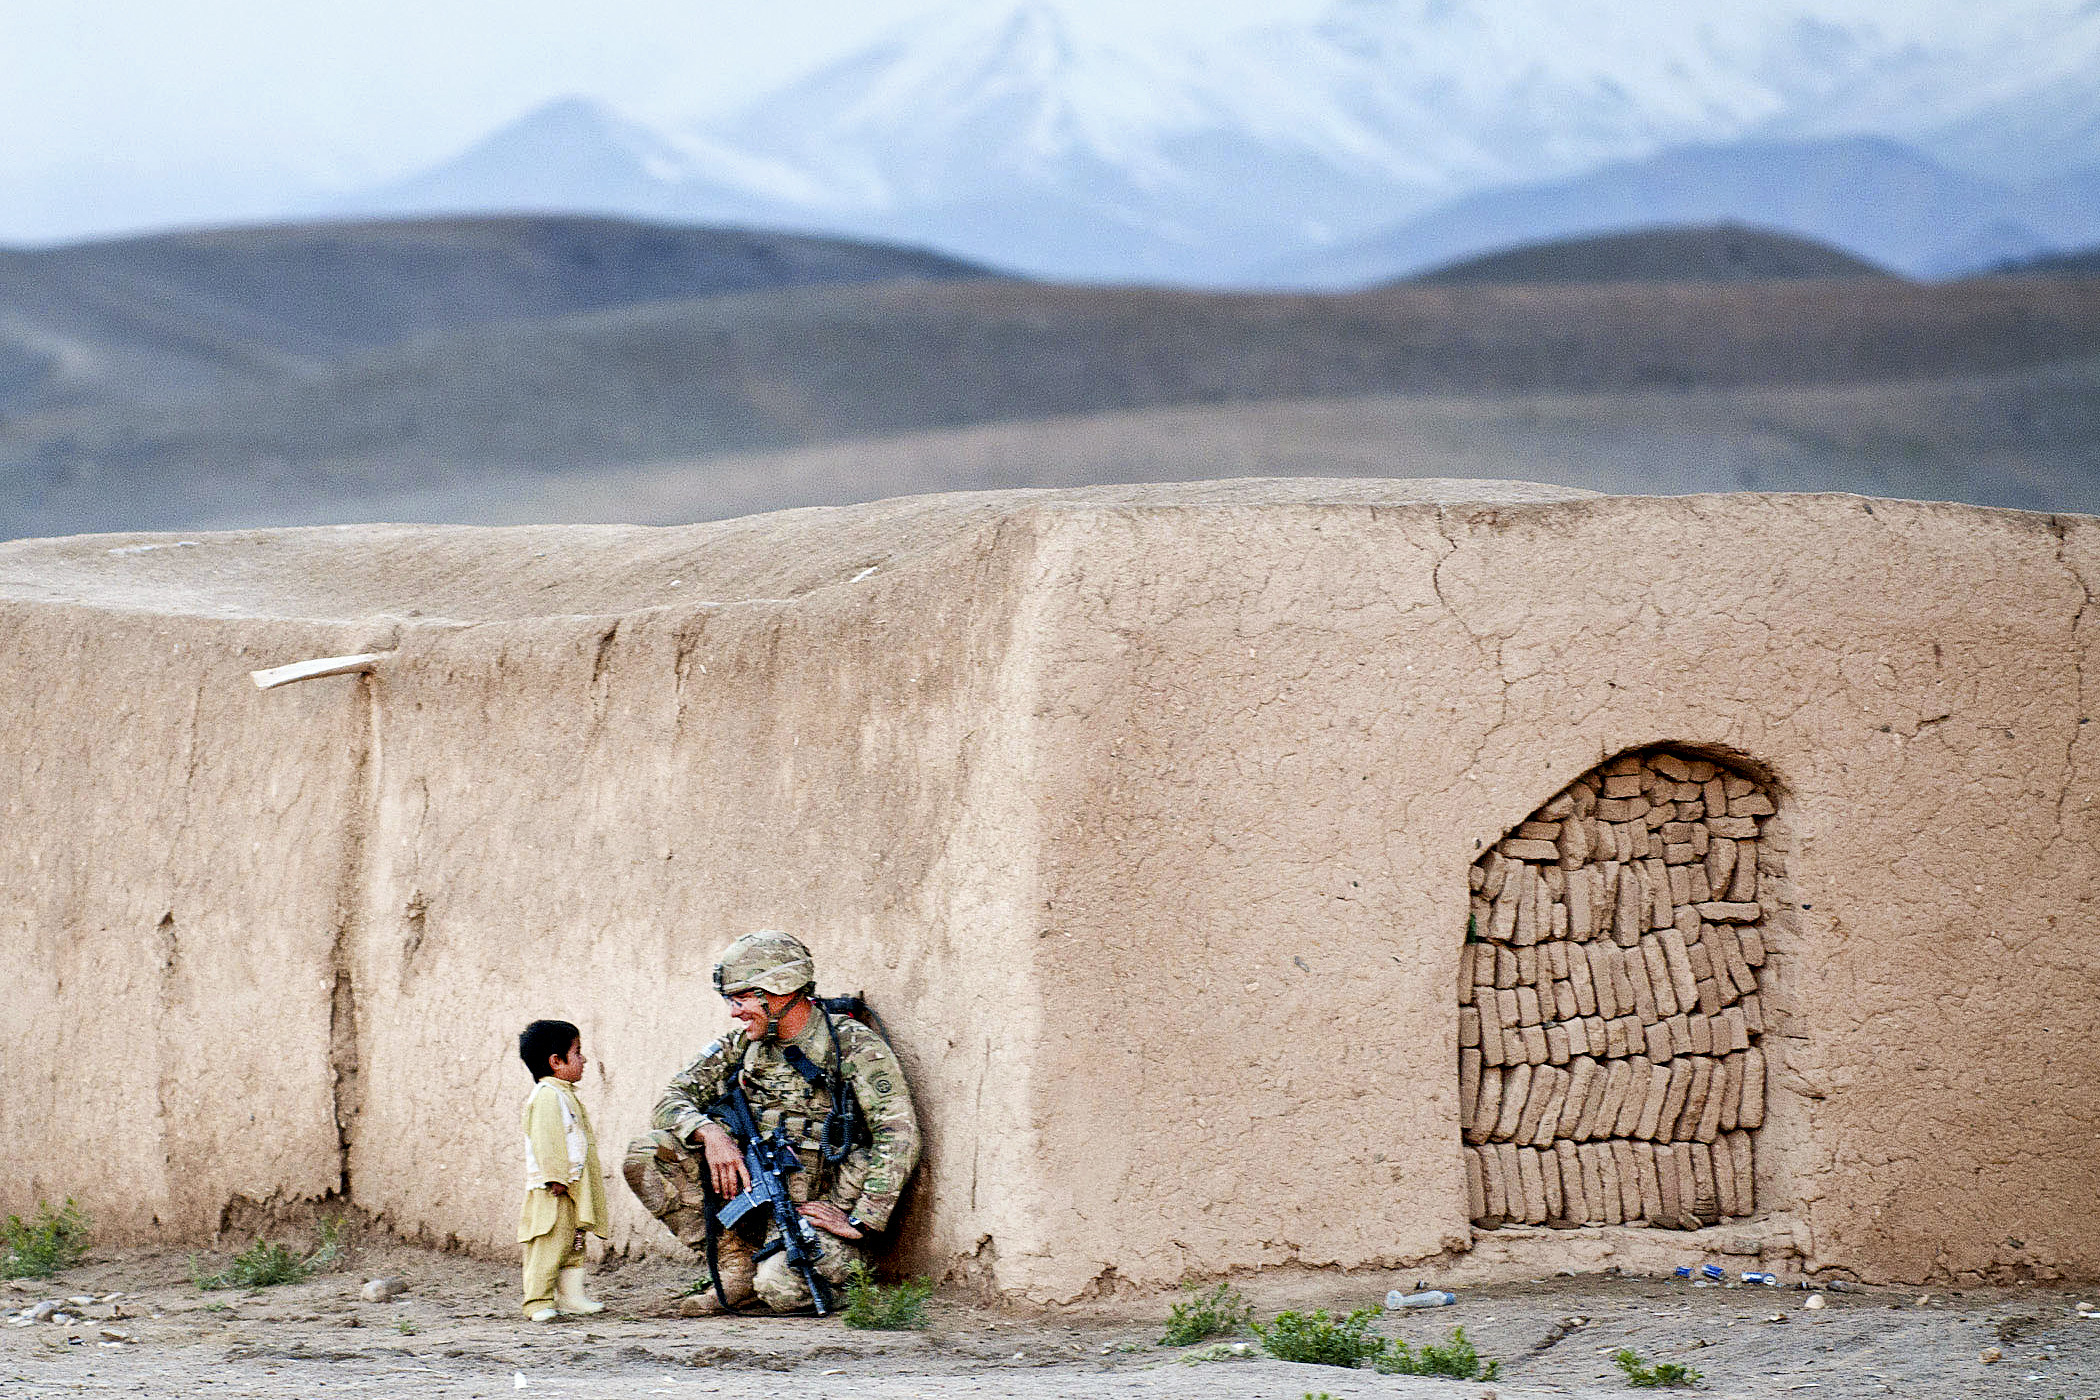 2100x1400 file:afghanistan chat -- sgt. joshua smith - wikimedia commons